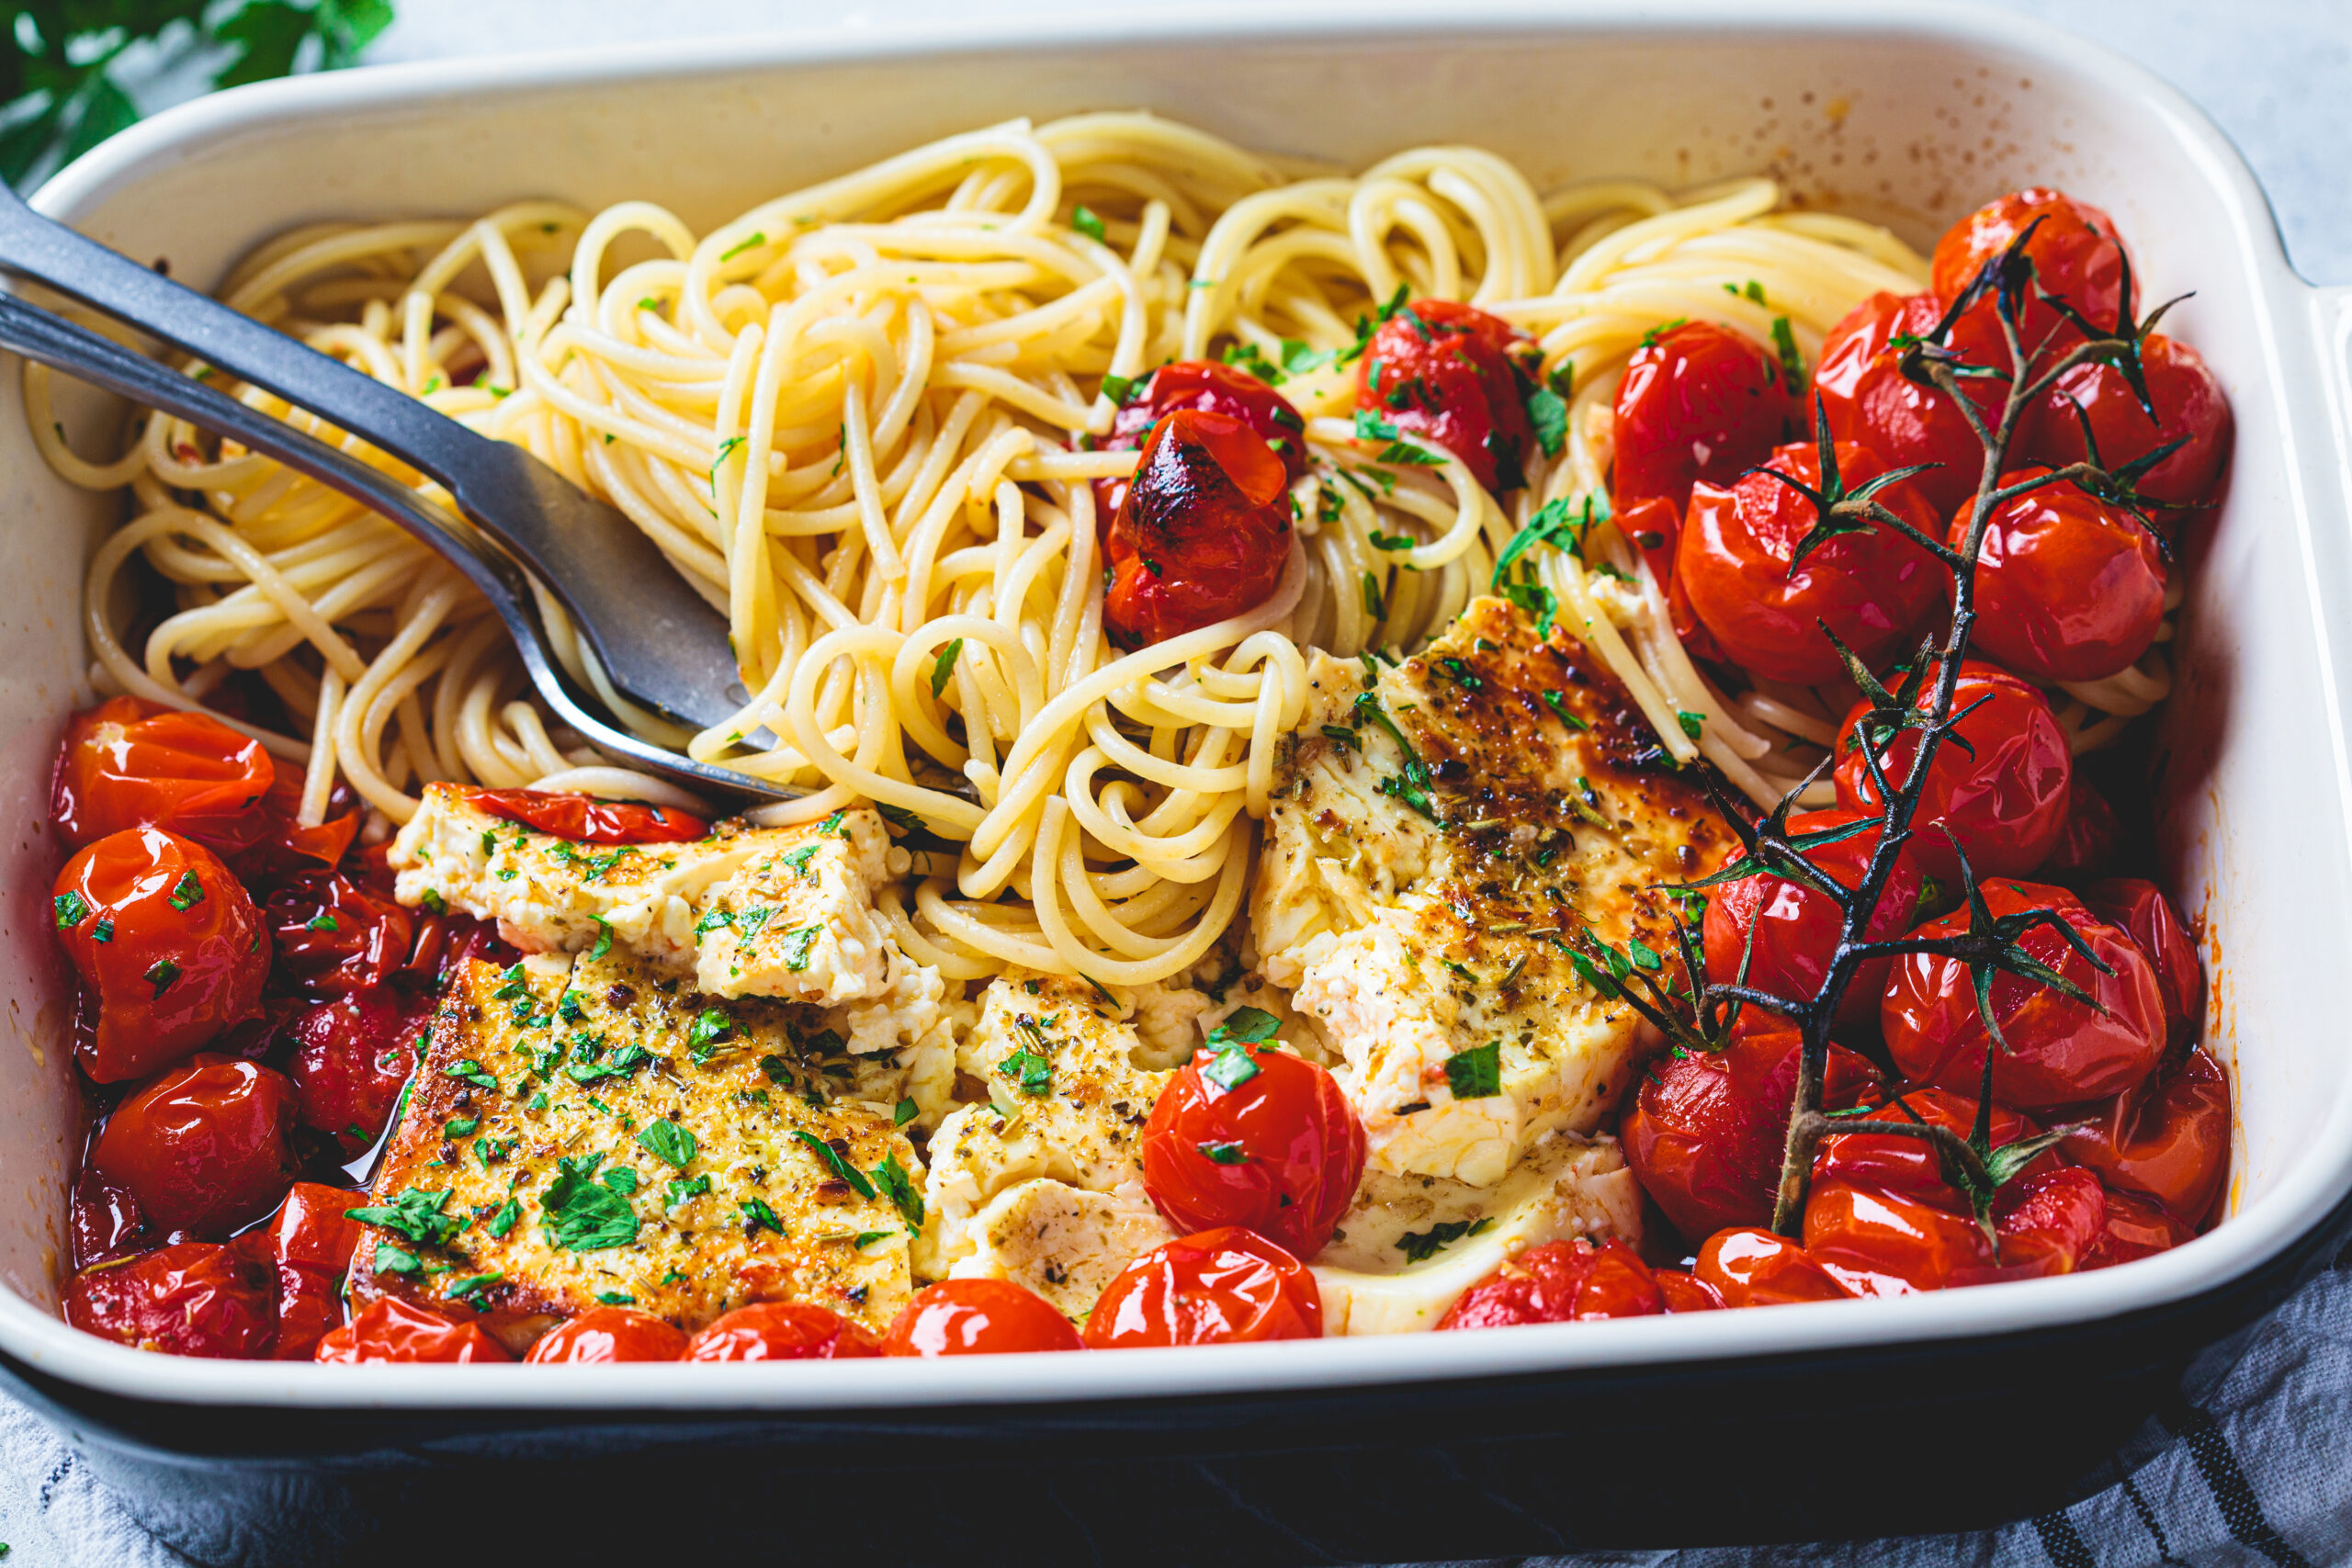 Baked feta cheese with tomato and spaghetti pasta in dish. Trend